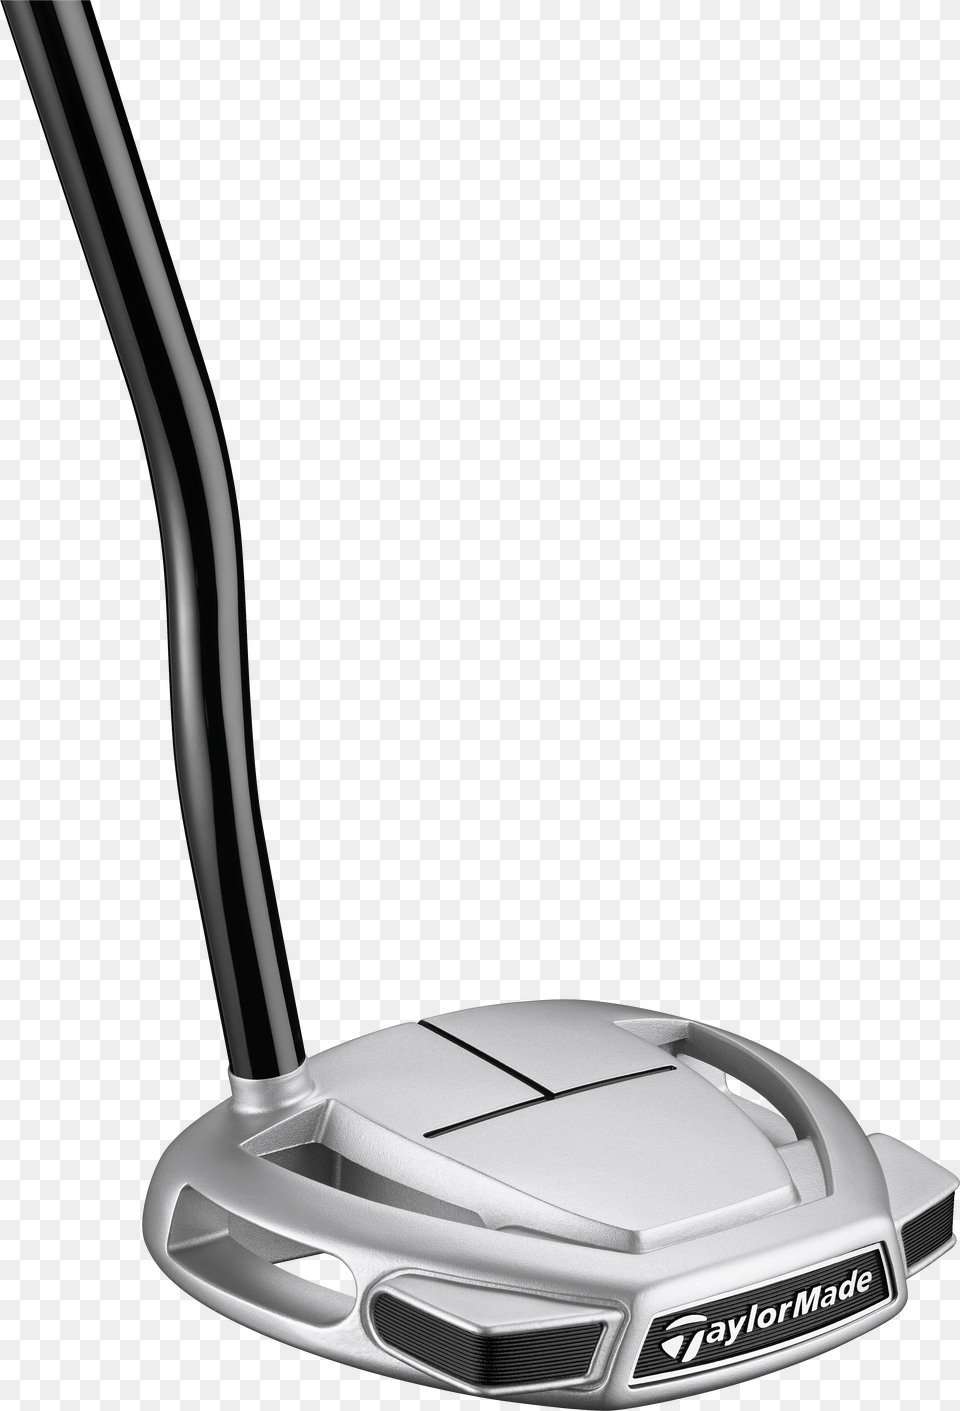 Taylormade Spider Mini Putter Png